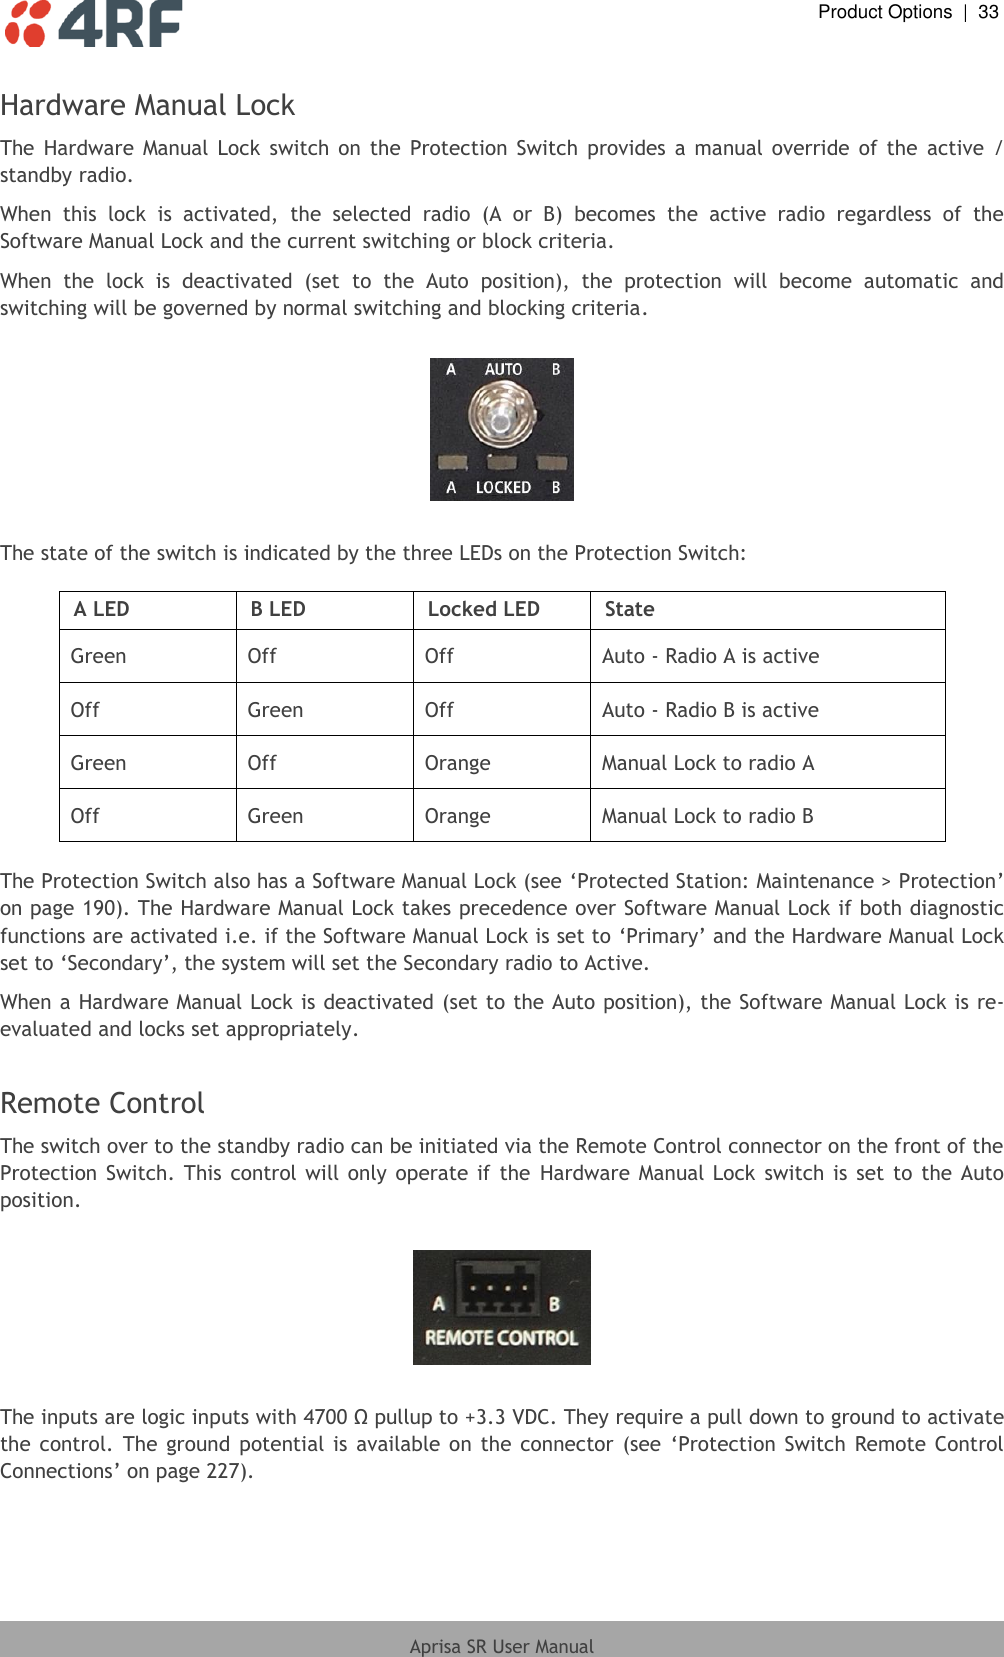  Product Options  |  33  Aprisa SR User Manual  Hardware Manual Lock The  Hardware  Manual  Lock  switch  on  the  Protection  Switch  provides  a  manual  override  of  the  active  / standby radio. When  this  lock  is  activated,  the  selected  radio  (A  or  B)  becomes  the  active  radio  regardless  of  the Software Manual Lock and the current switching or block criteria. When  the  lock  is  deactivated  (set  to  the  Auto  position),  the  protection  will  become  automatic  and switching will be governed by normal switching and blocking criteria.    The state of the switch is indicated by the three LEDs on the Protection Switch:  A LED B LED Locked LED State Green Off Off Auto - Radio A is active Off Green Off Auto - Radio B is active Green Off Orange Manual Lock to radio A Off Green Orange Manual Lock to radio B  The Protection Switch also has a Software Manual Lock (see ‘Protected Station: Maintenance &gt; Protection’ on page 190). The Hardware Manual Lock takes precedence over Software Manual Lock if both diagnostic functions are activated i.e. if the Software Manual Lock is set to ‘Primary’ and the Hardware Manual Lock set to ‘Secondary’, the system will set the Secondary radio to Active. When a Hardware Manual Lock is deactivated (set to the Auto position), the Software Manual Lock is re-evaluated and locks set appropriately.  Remote Control The switch over to the standby radio can be initiated via the Remote Control connector on the front of the Protection  Switch.  This  control will only  operate  if  the  Hardware  Manual  Lock switch is  set  to  the Auto position.    The inputs are logic inputs with 4700 Ω pullup to +3.3 VDC. They require a pull down to ground to activate the  control.  The  ground  potential is  available on  the  connector  (see  ‘Protection Switch Remote  Control Connections’ on page 227). 